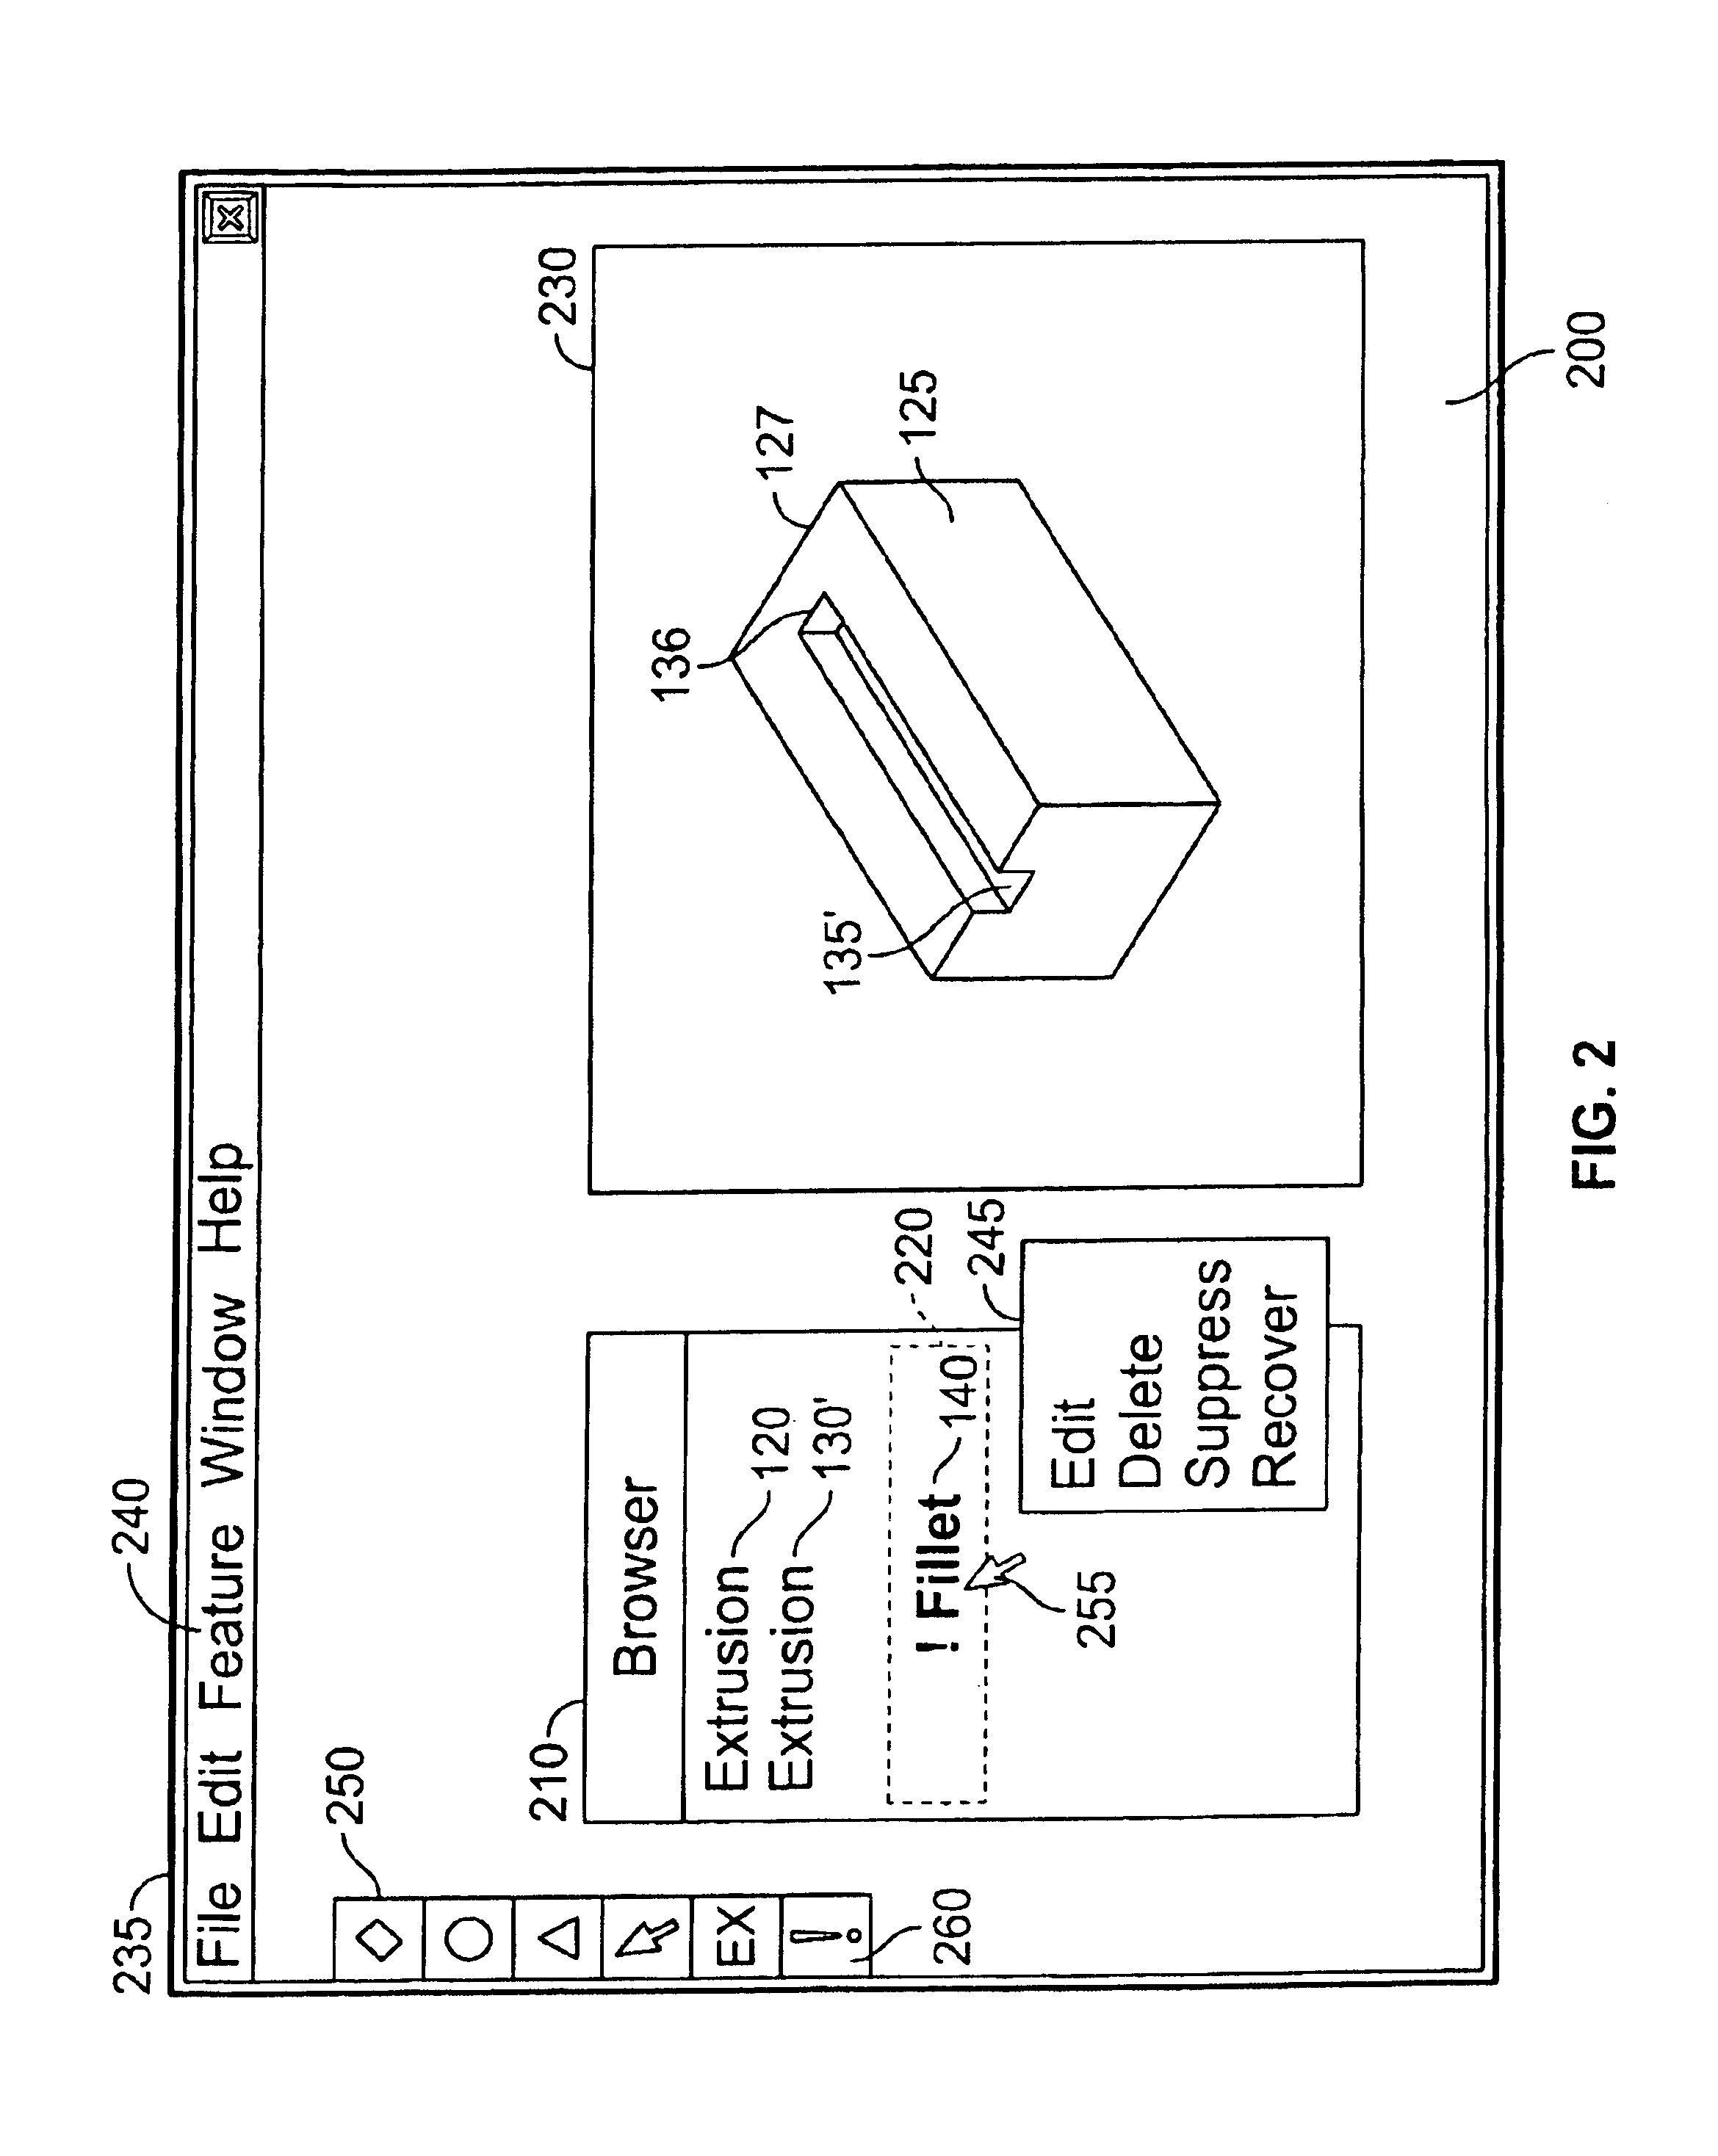 Error recovery in a computer aided design environment